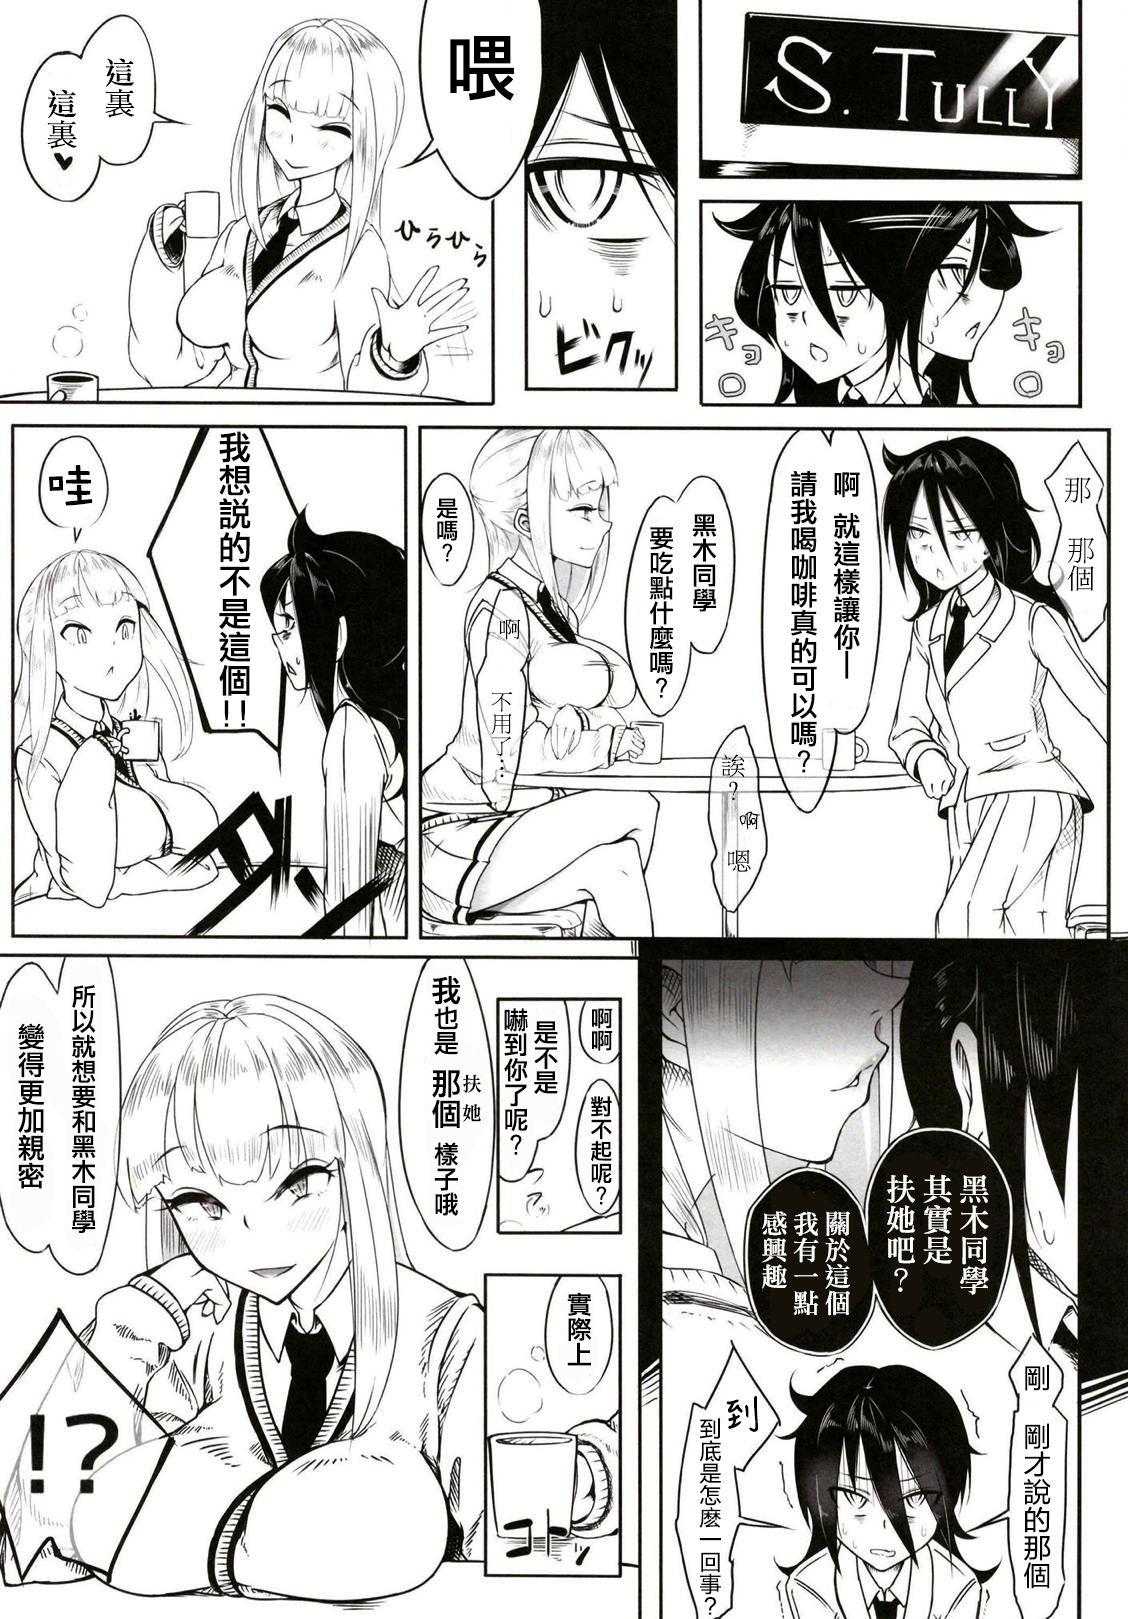 Mexico Okaa-san to Issho - Its not my fault that im not popular Italian - Page 5